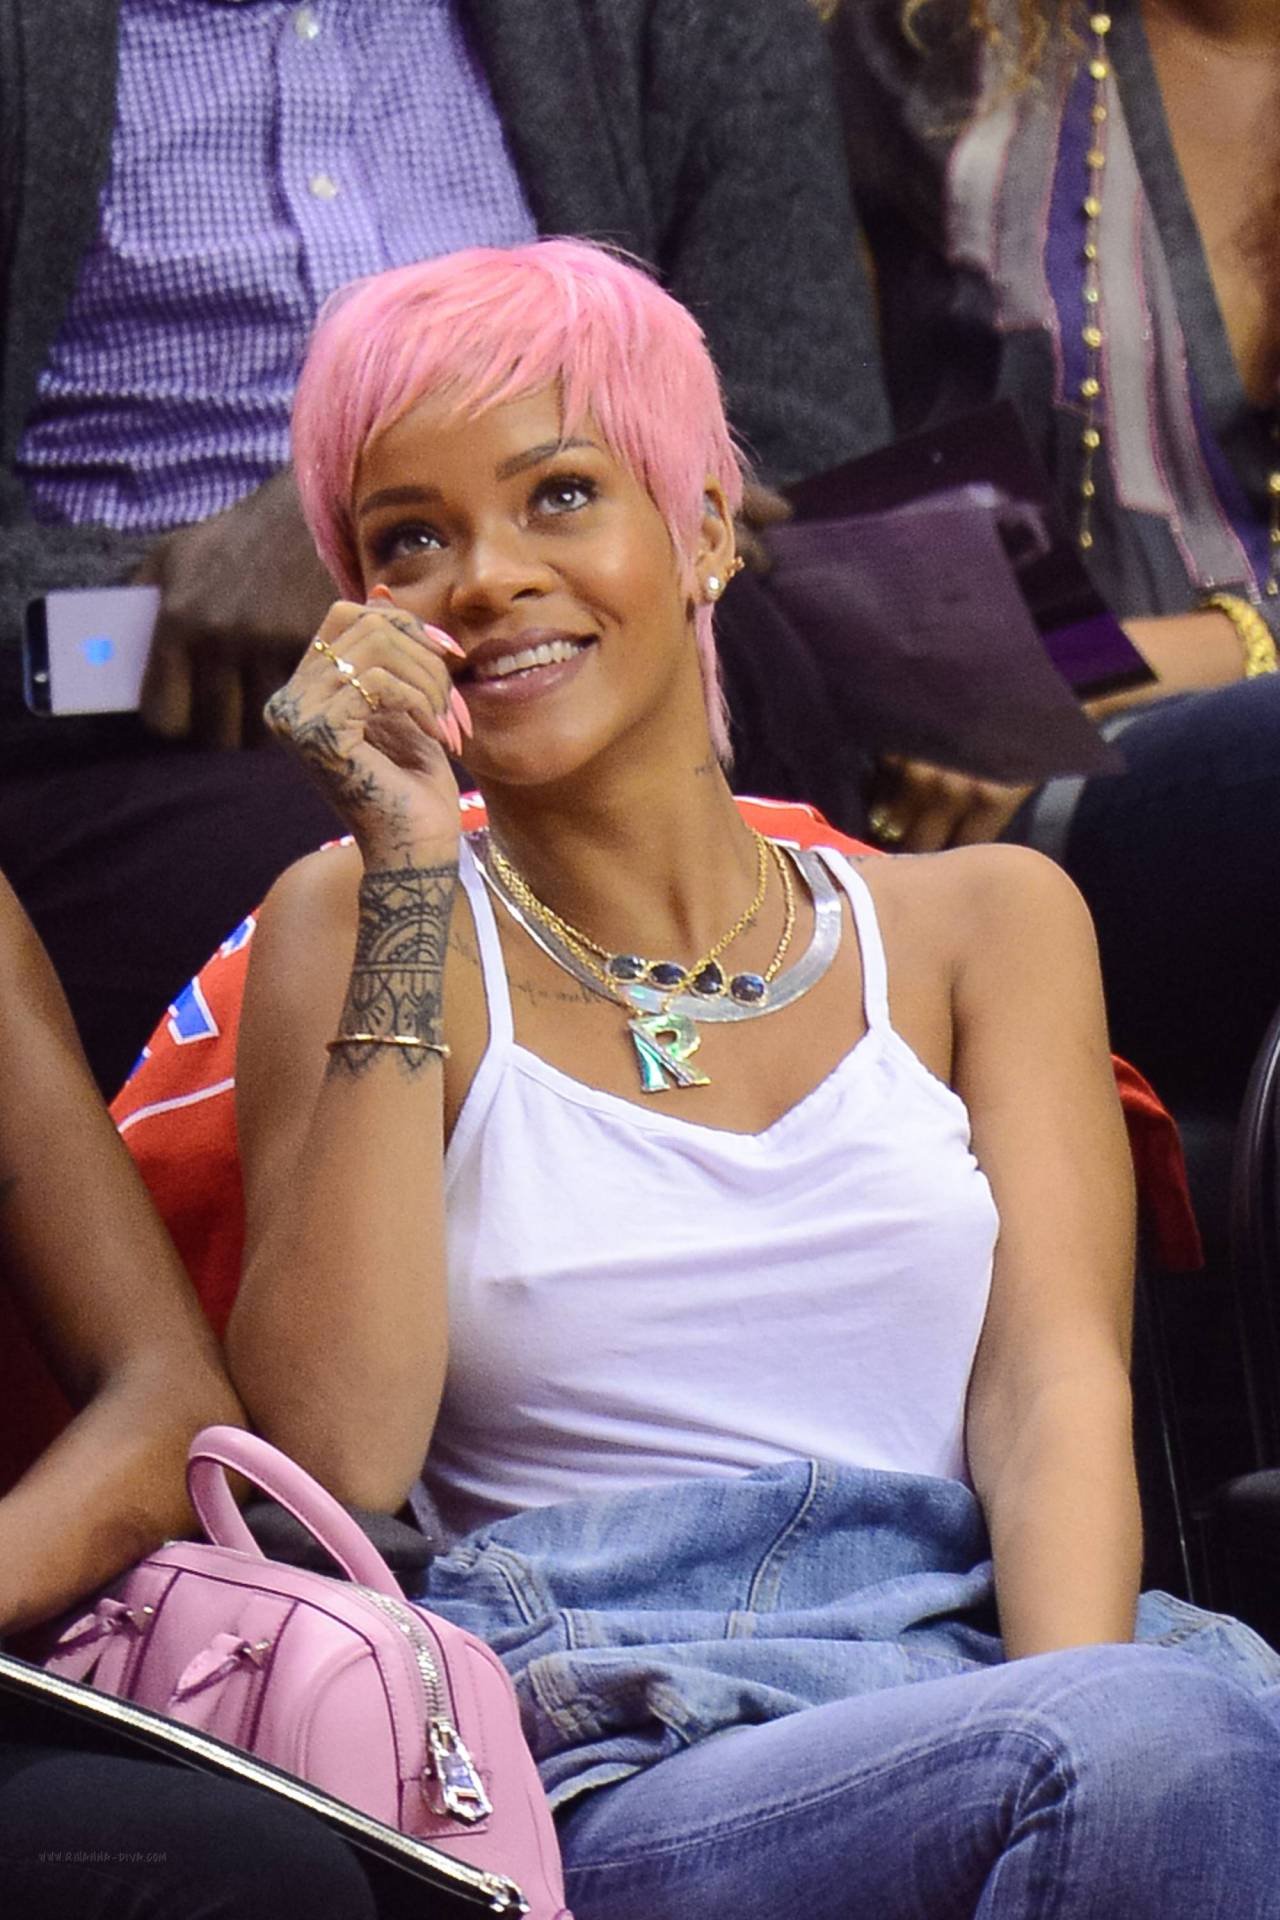 Rihanna. ♥  Oh wow she looks so cute and sexy with pink hair.♥